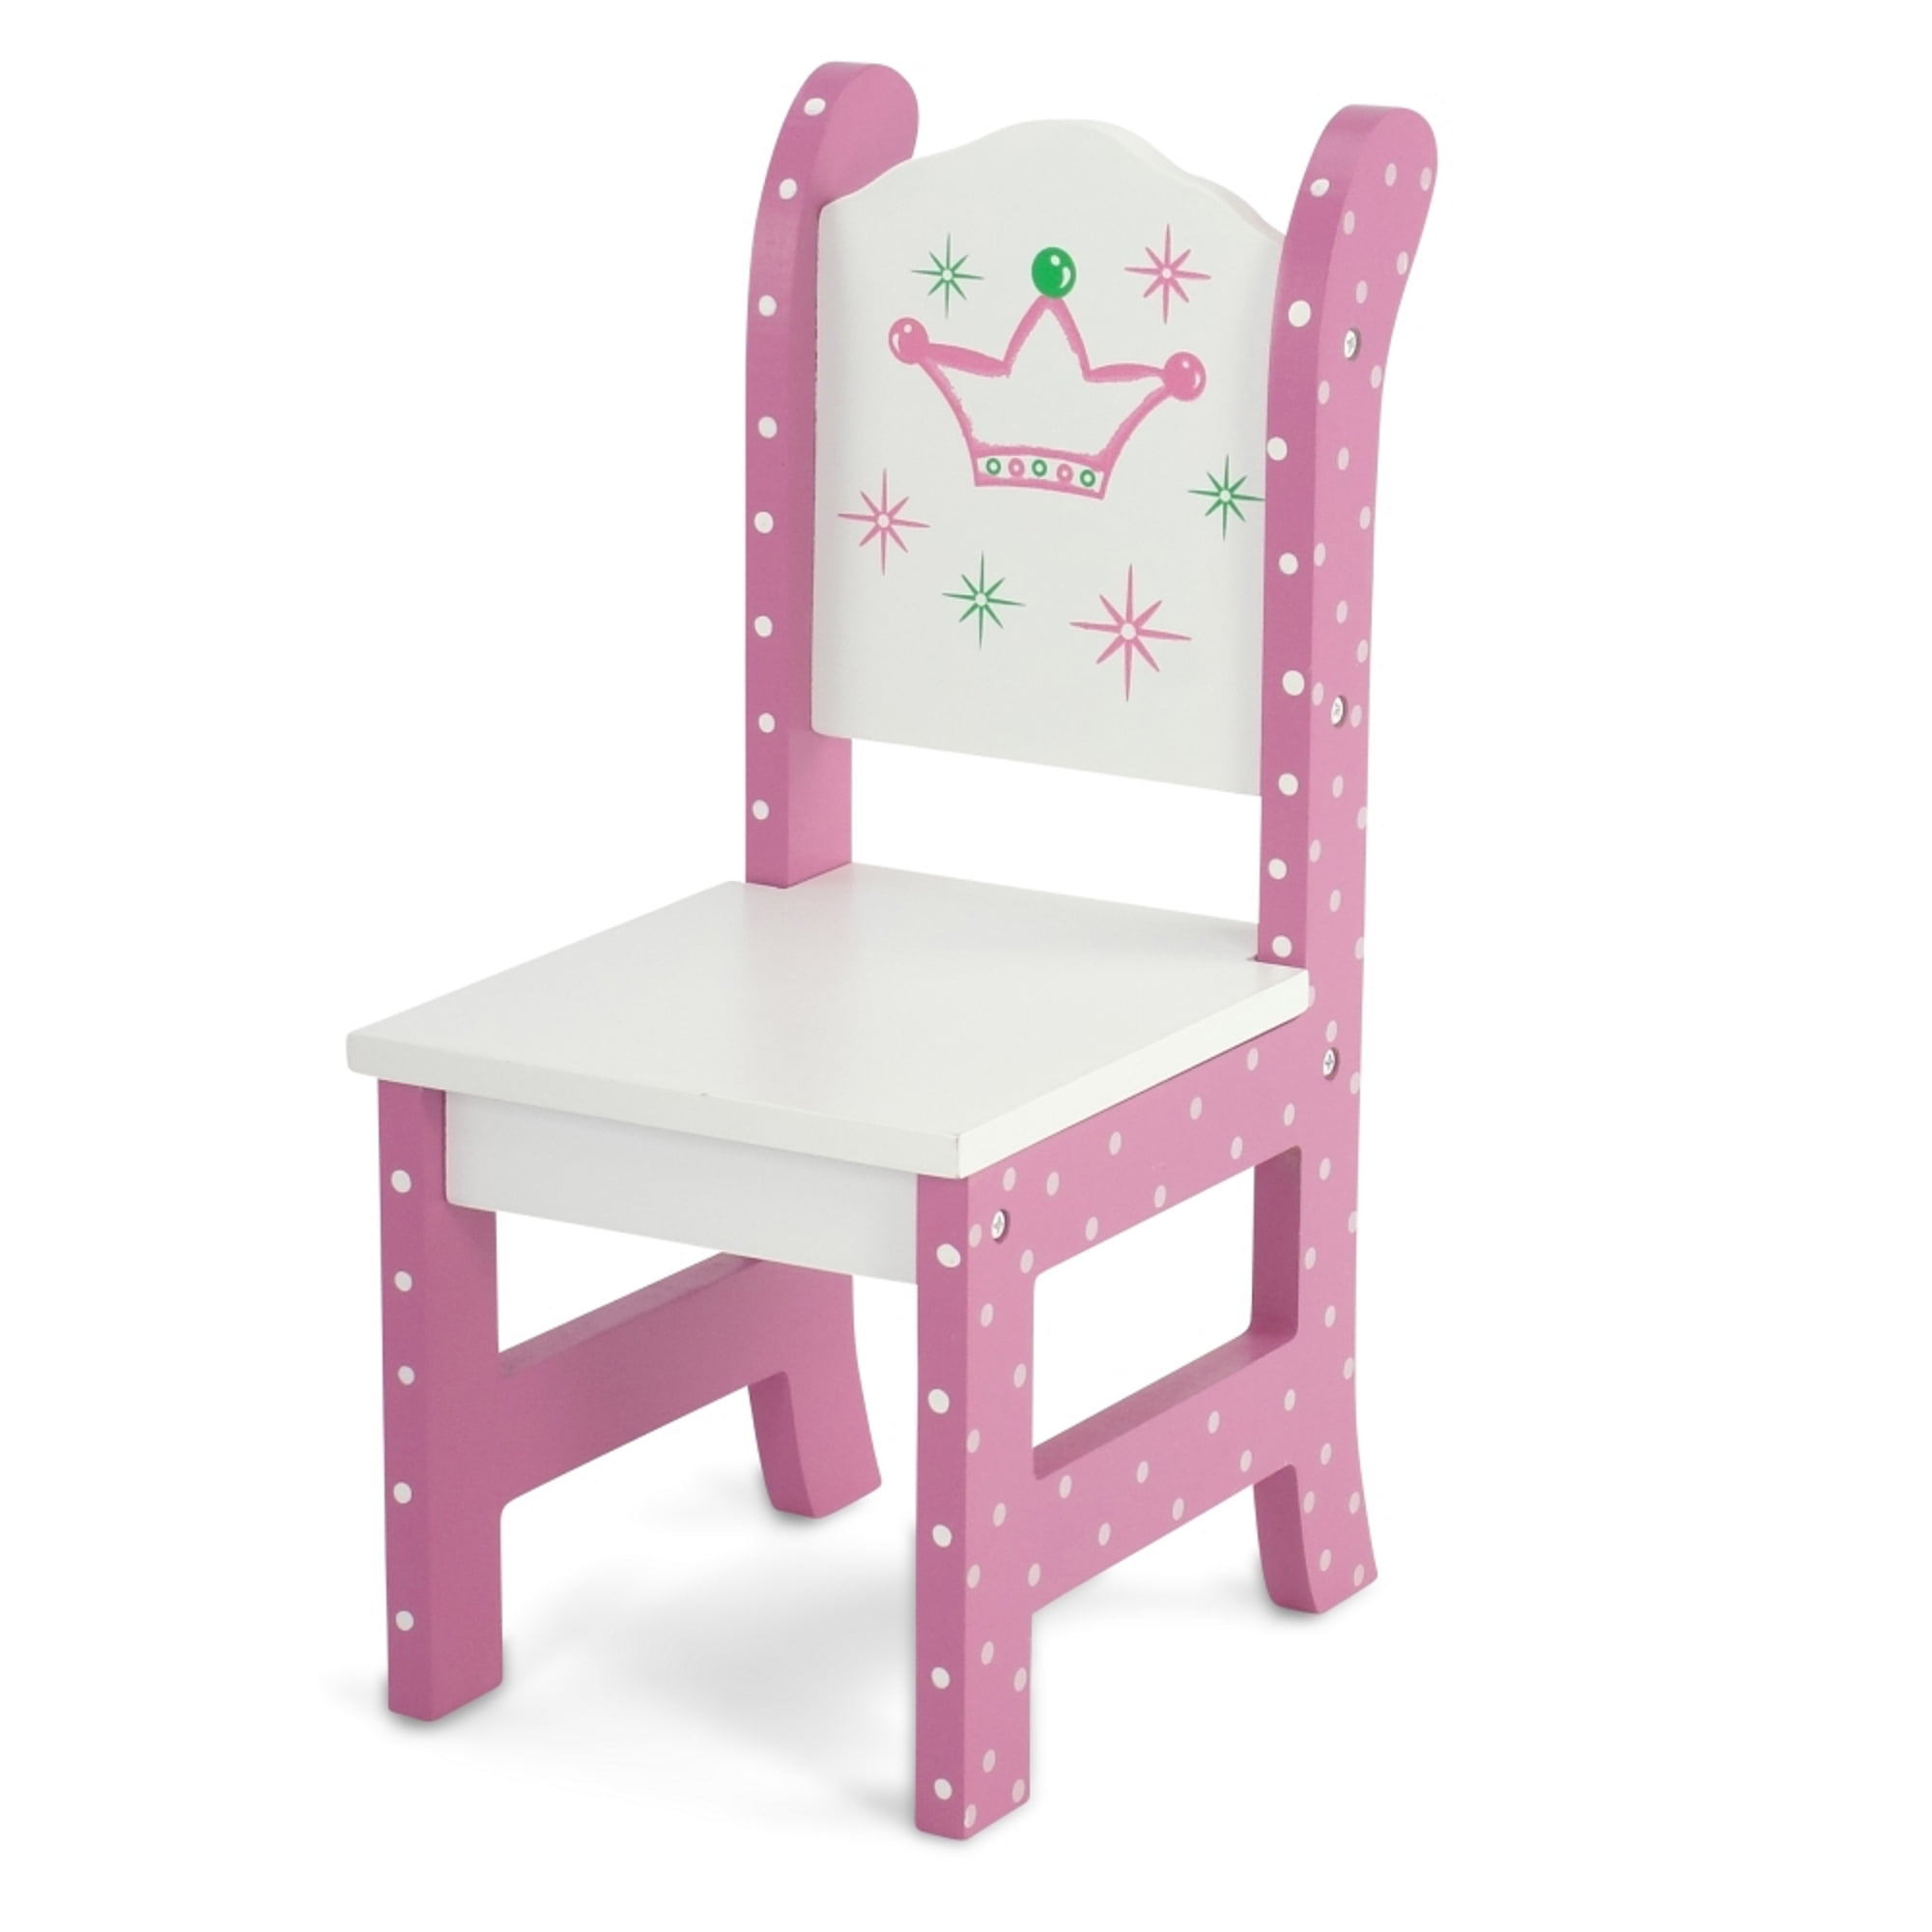 18  Wish Crown Table and Chairs 18 Inch Doll Furniture Fits American Girl Dolls 